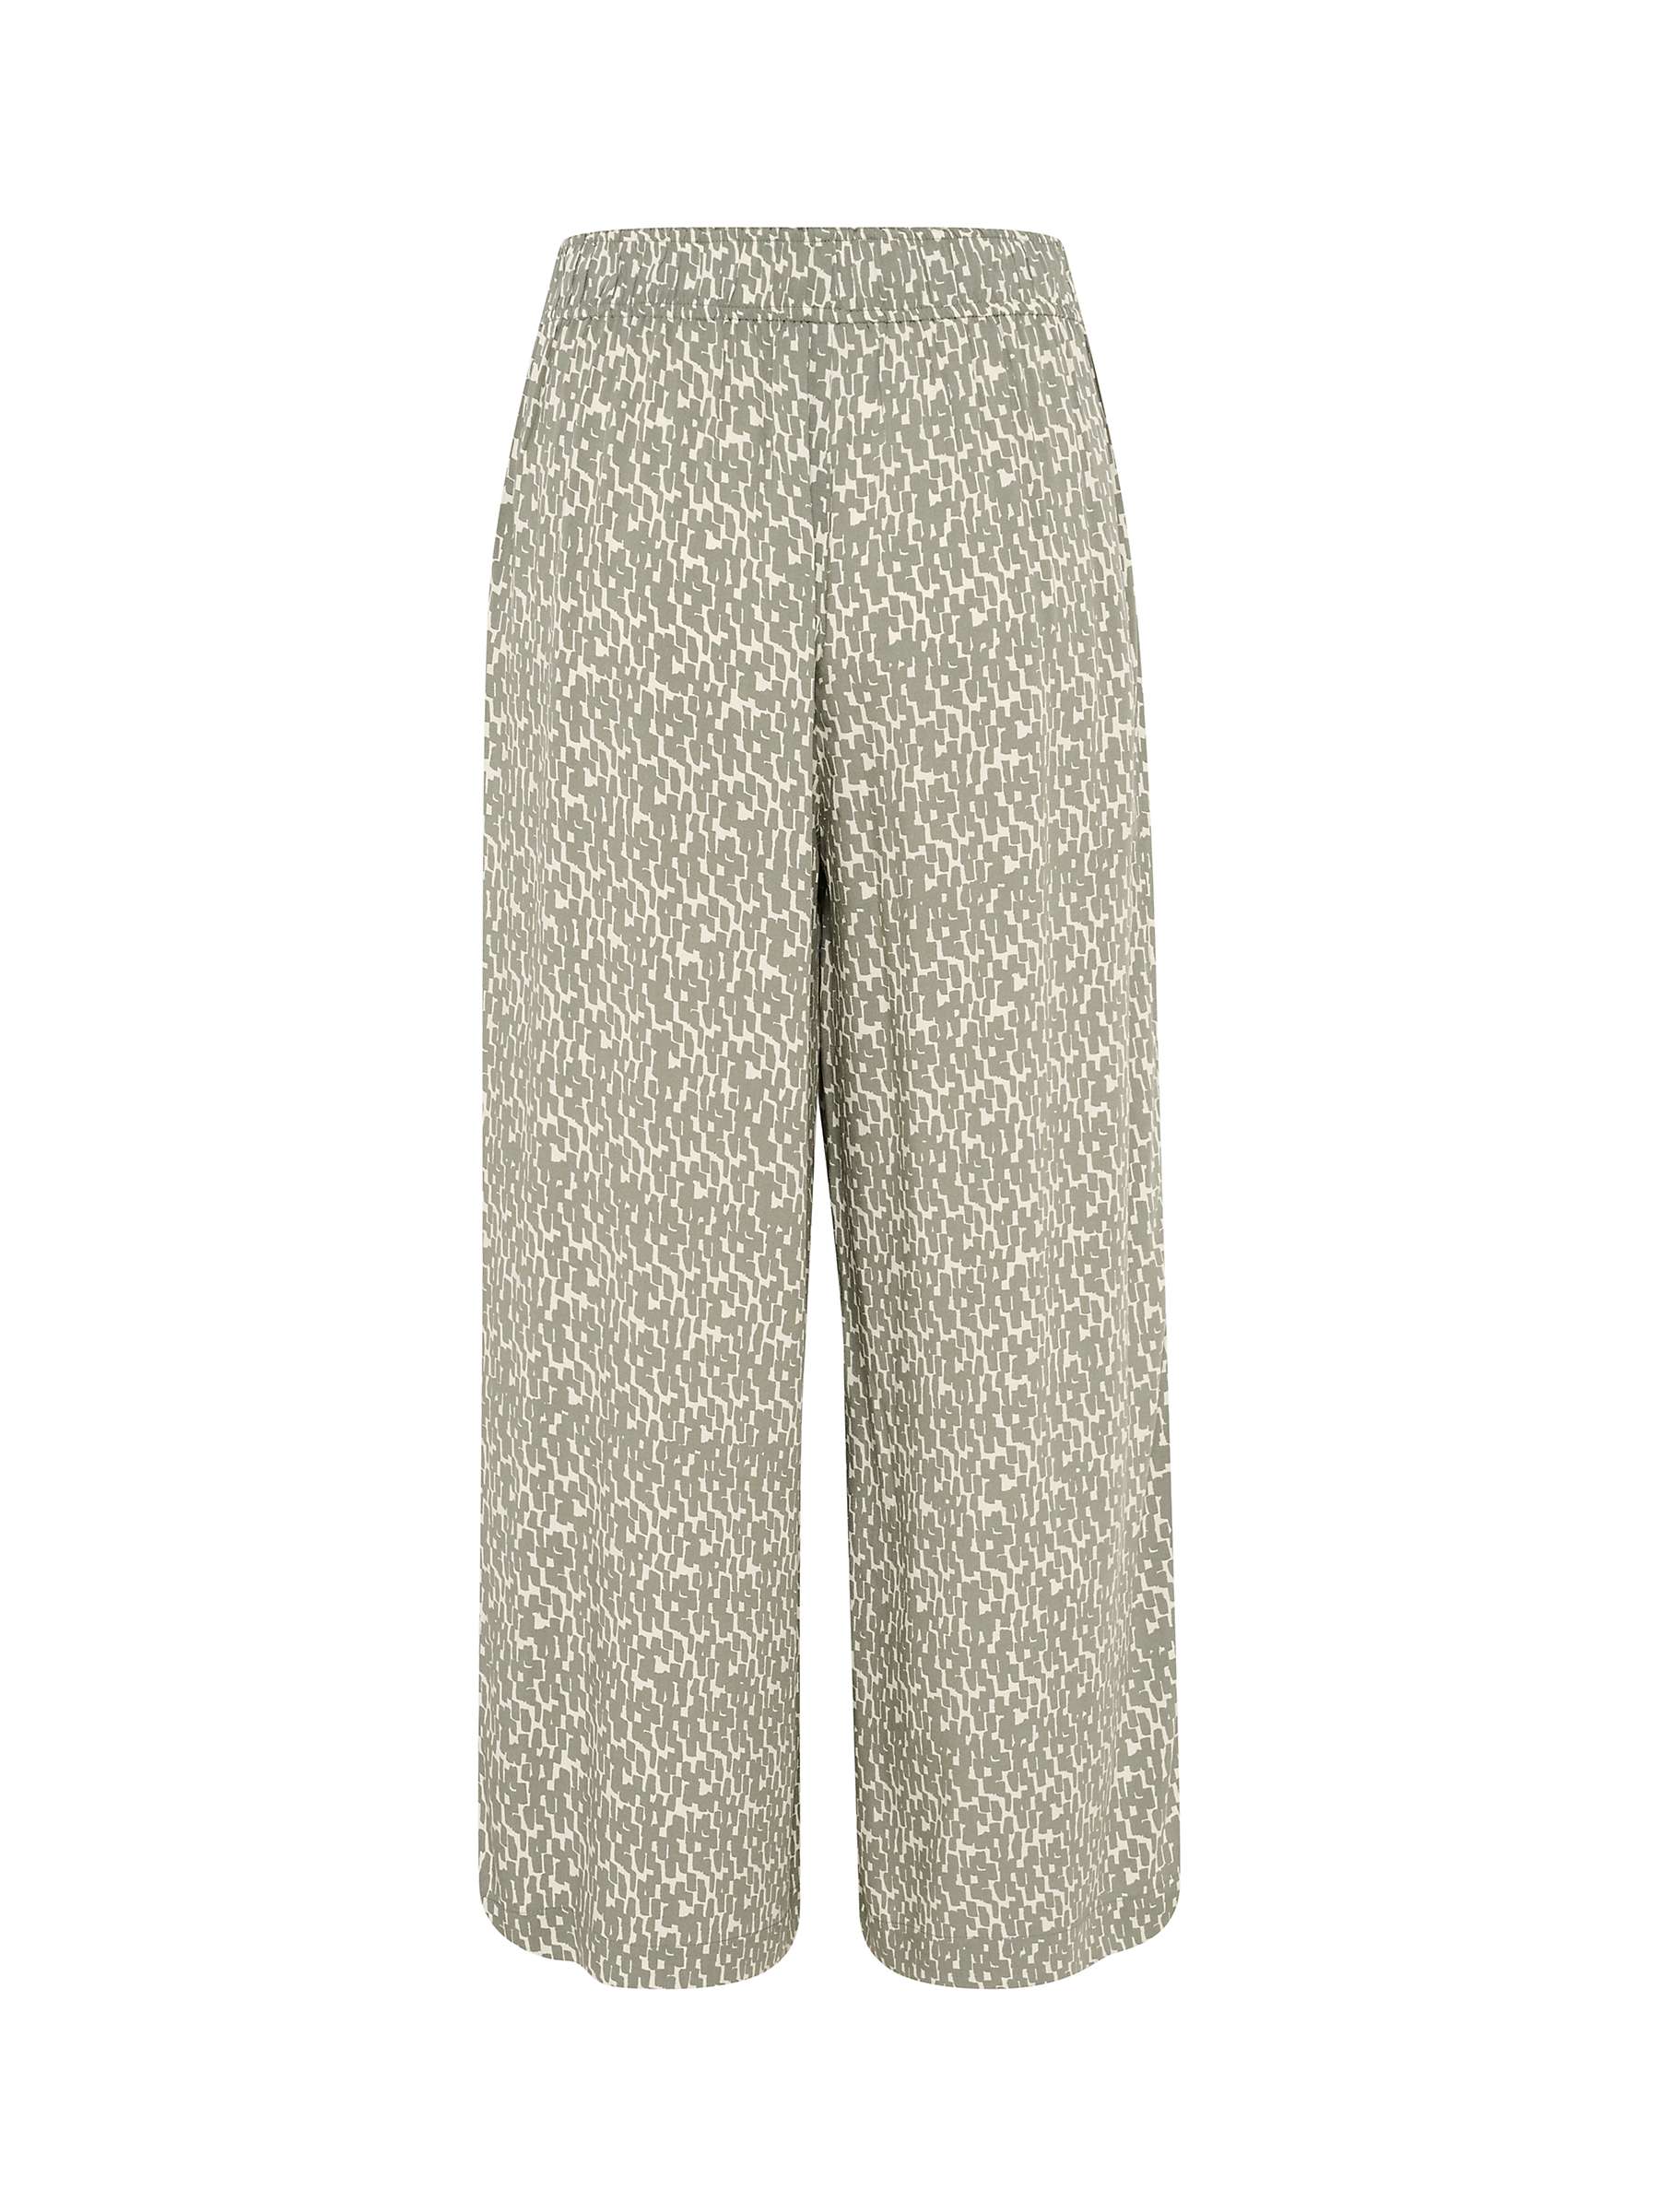 Buy Part Two Alfi Elasticated Wide Leg Trousers, Agave Green Online at johnlewis.com